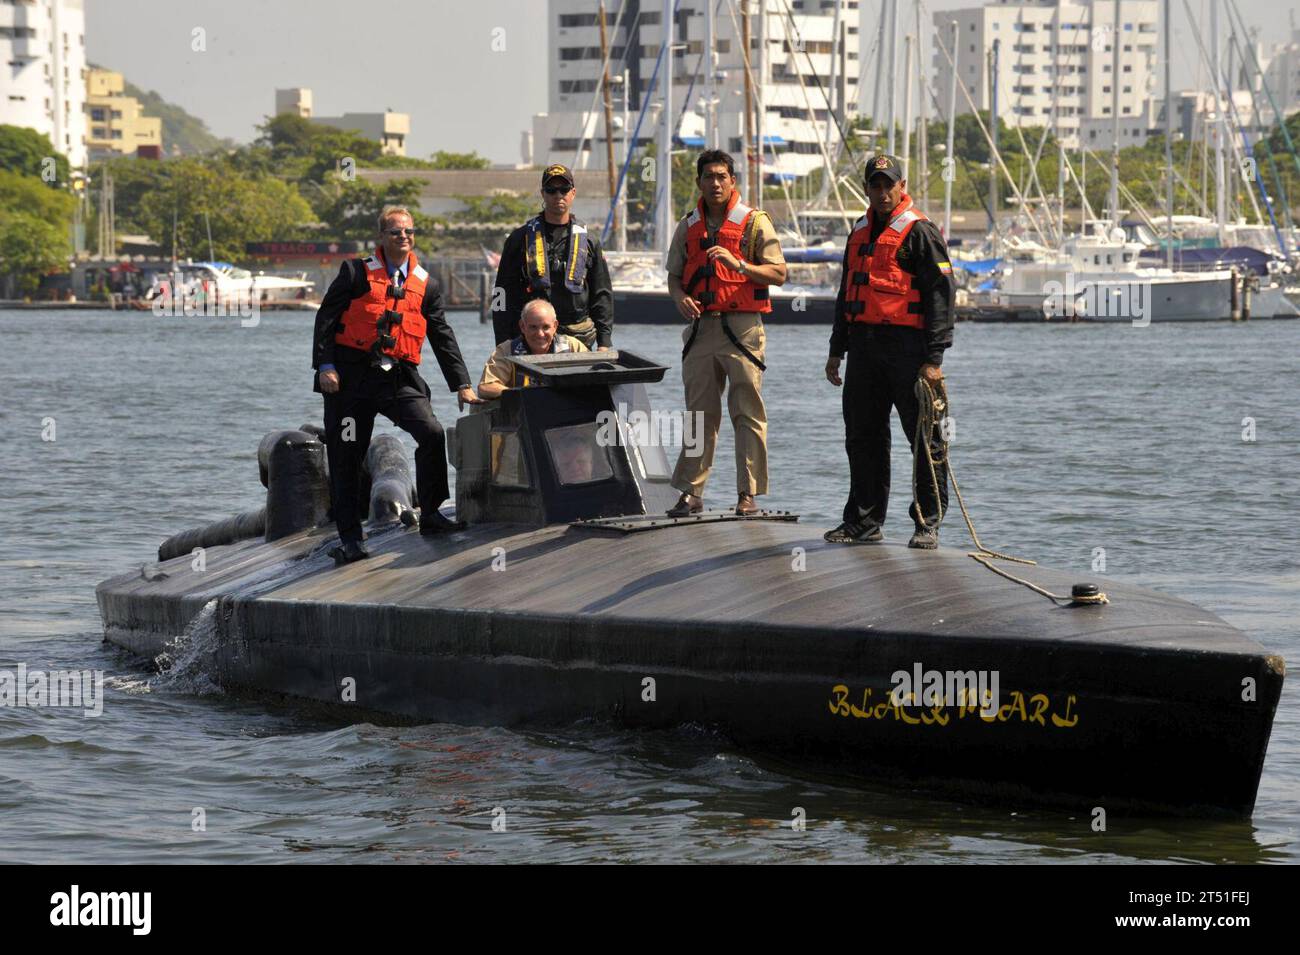 0912058273J-220  CARTAGENA, Colombia (Dec. 5, 2009) Chief of Naval Operations (CNO) Adm. Gary Roughead drives a semi-submersible boat while meeting with Colombian Coast Guard Forces at Naval Base Bolivar. The boat was seized from drug smugglers in the Caribbean. Navy Stock Photo